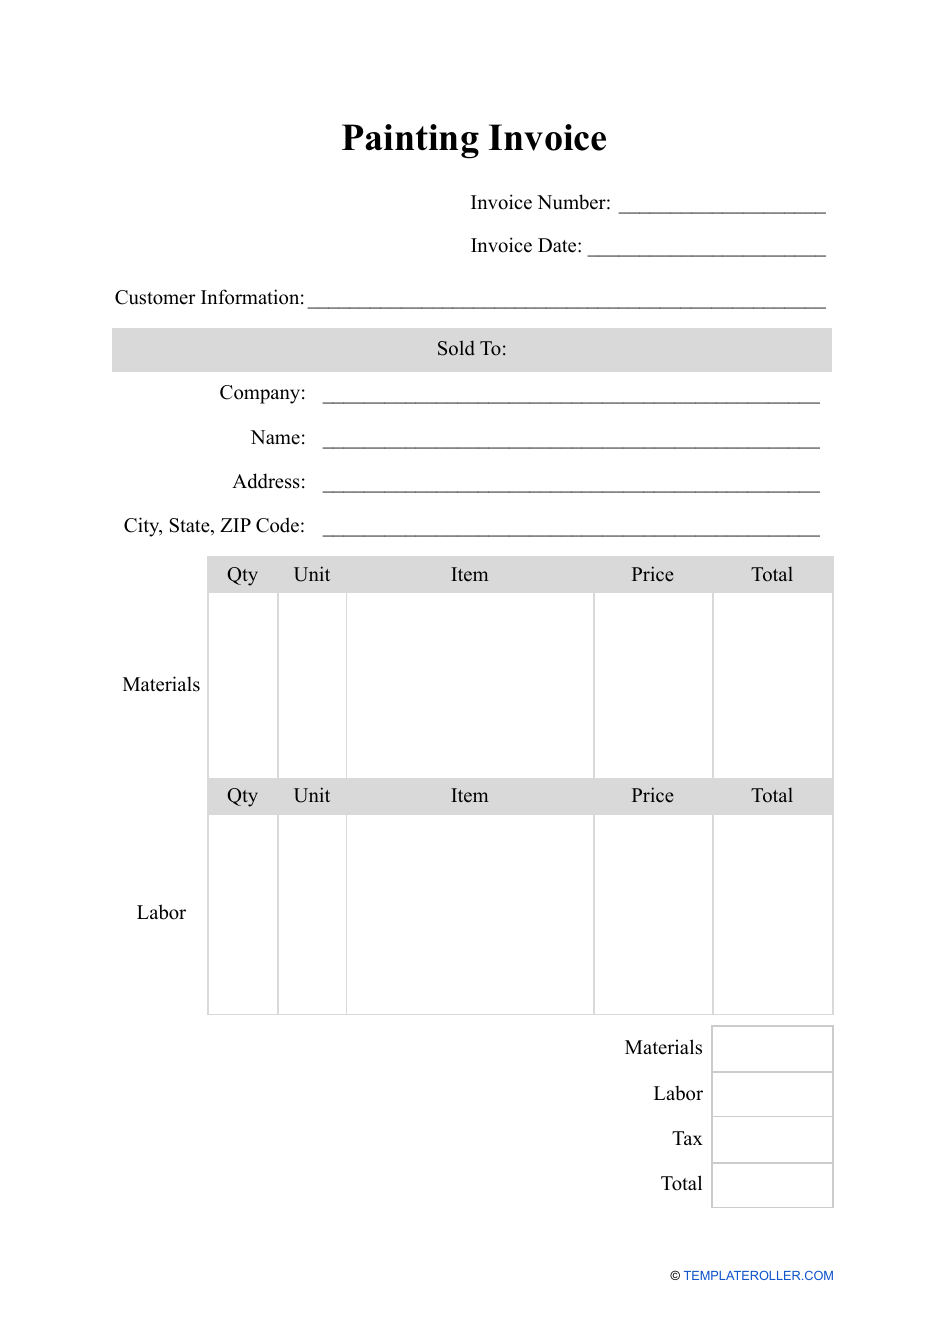 Painting Invoice Template, Page 1